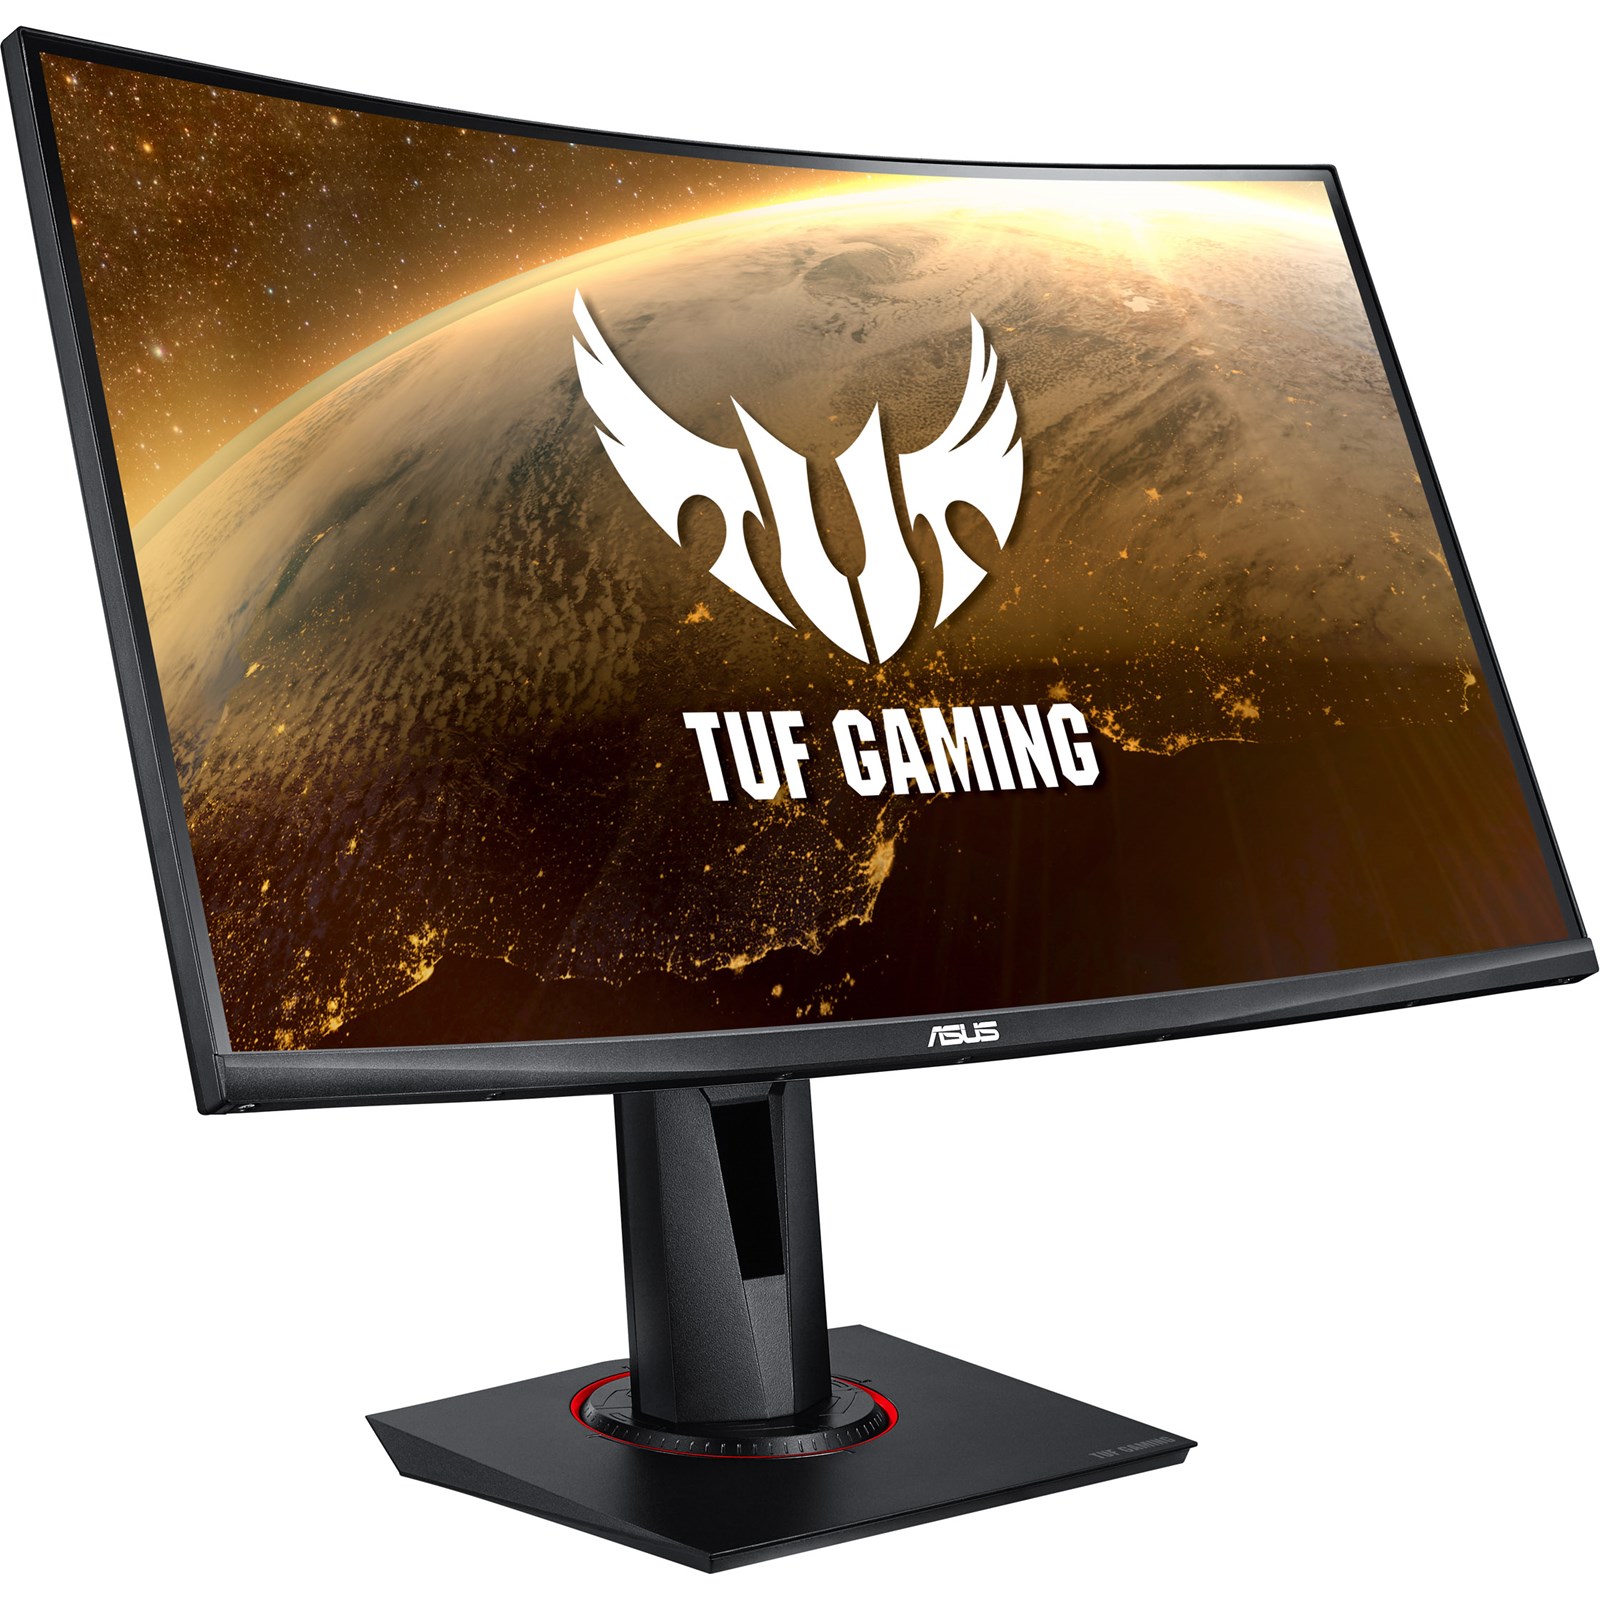 Asus - ASUS 27" TUF Gaming VG27WQ 2560x1440 VA 165Hz 1ms FreeSync HDR400 Curved Widescreen LED Backlit Gami